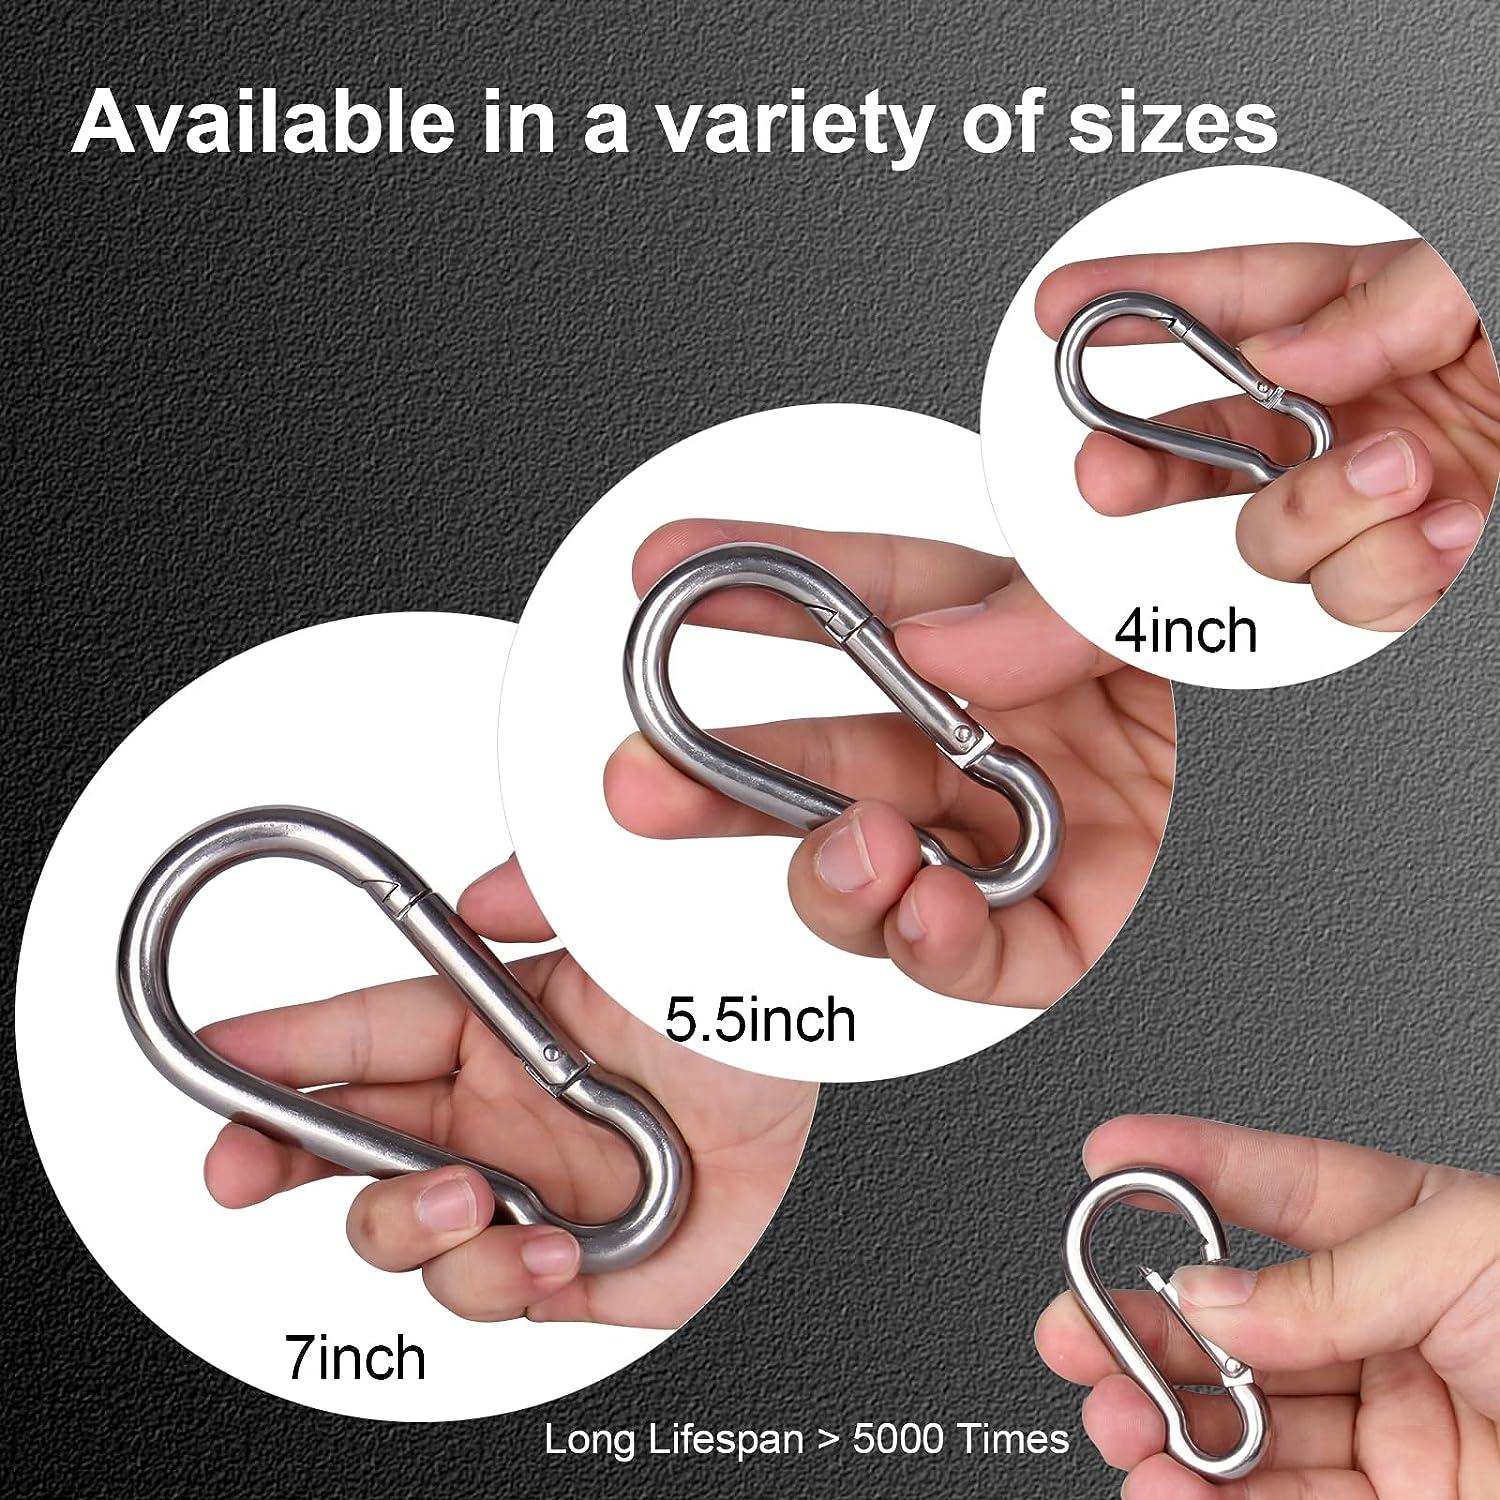 Kinklink 304 Stainless Steel Carabiner Clip, 4 inch Heavy Duty Spring Snap  Hook, Caribeener Clips for Outdoor Camping, Swing Set, Hammock, Hiking  Travel, Fishing, Weight Lifting Machine 4.00inch 1